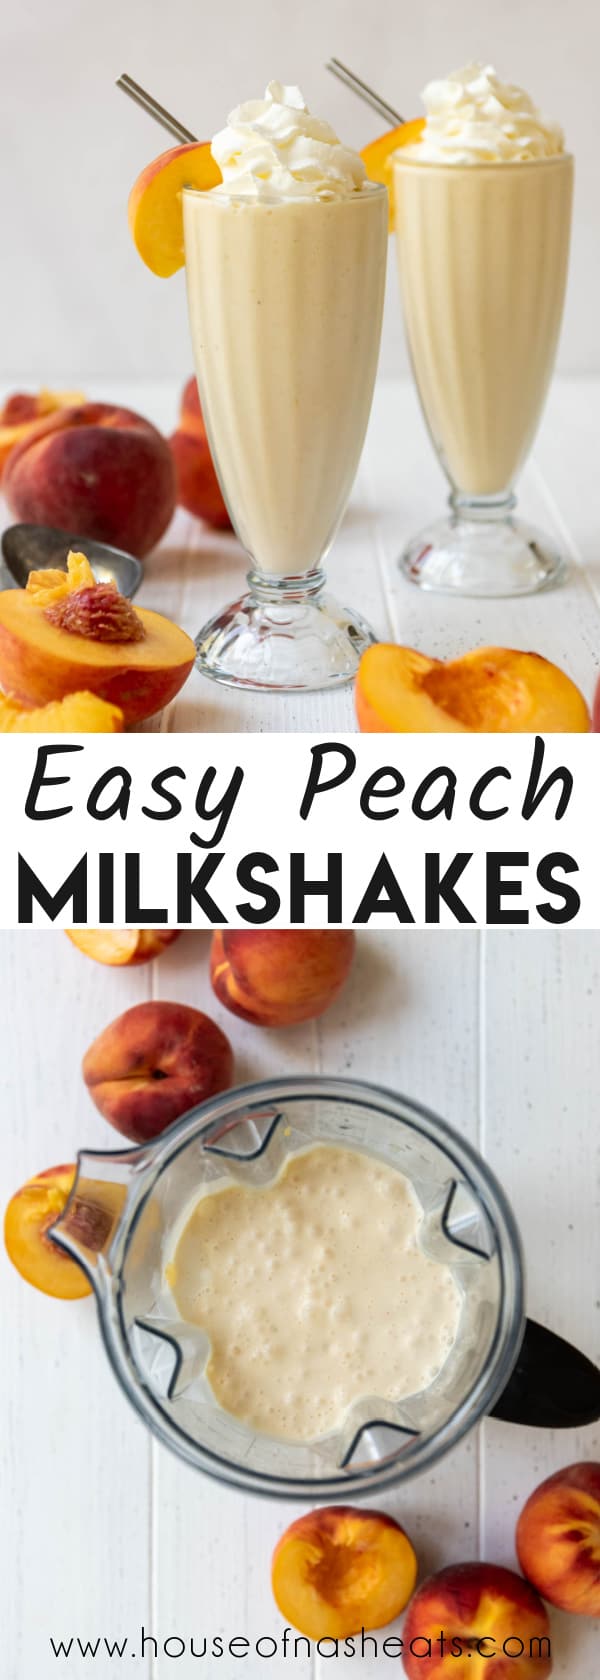 A collage of images of peach milkshakes with text overlay.